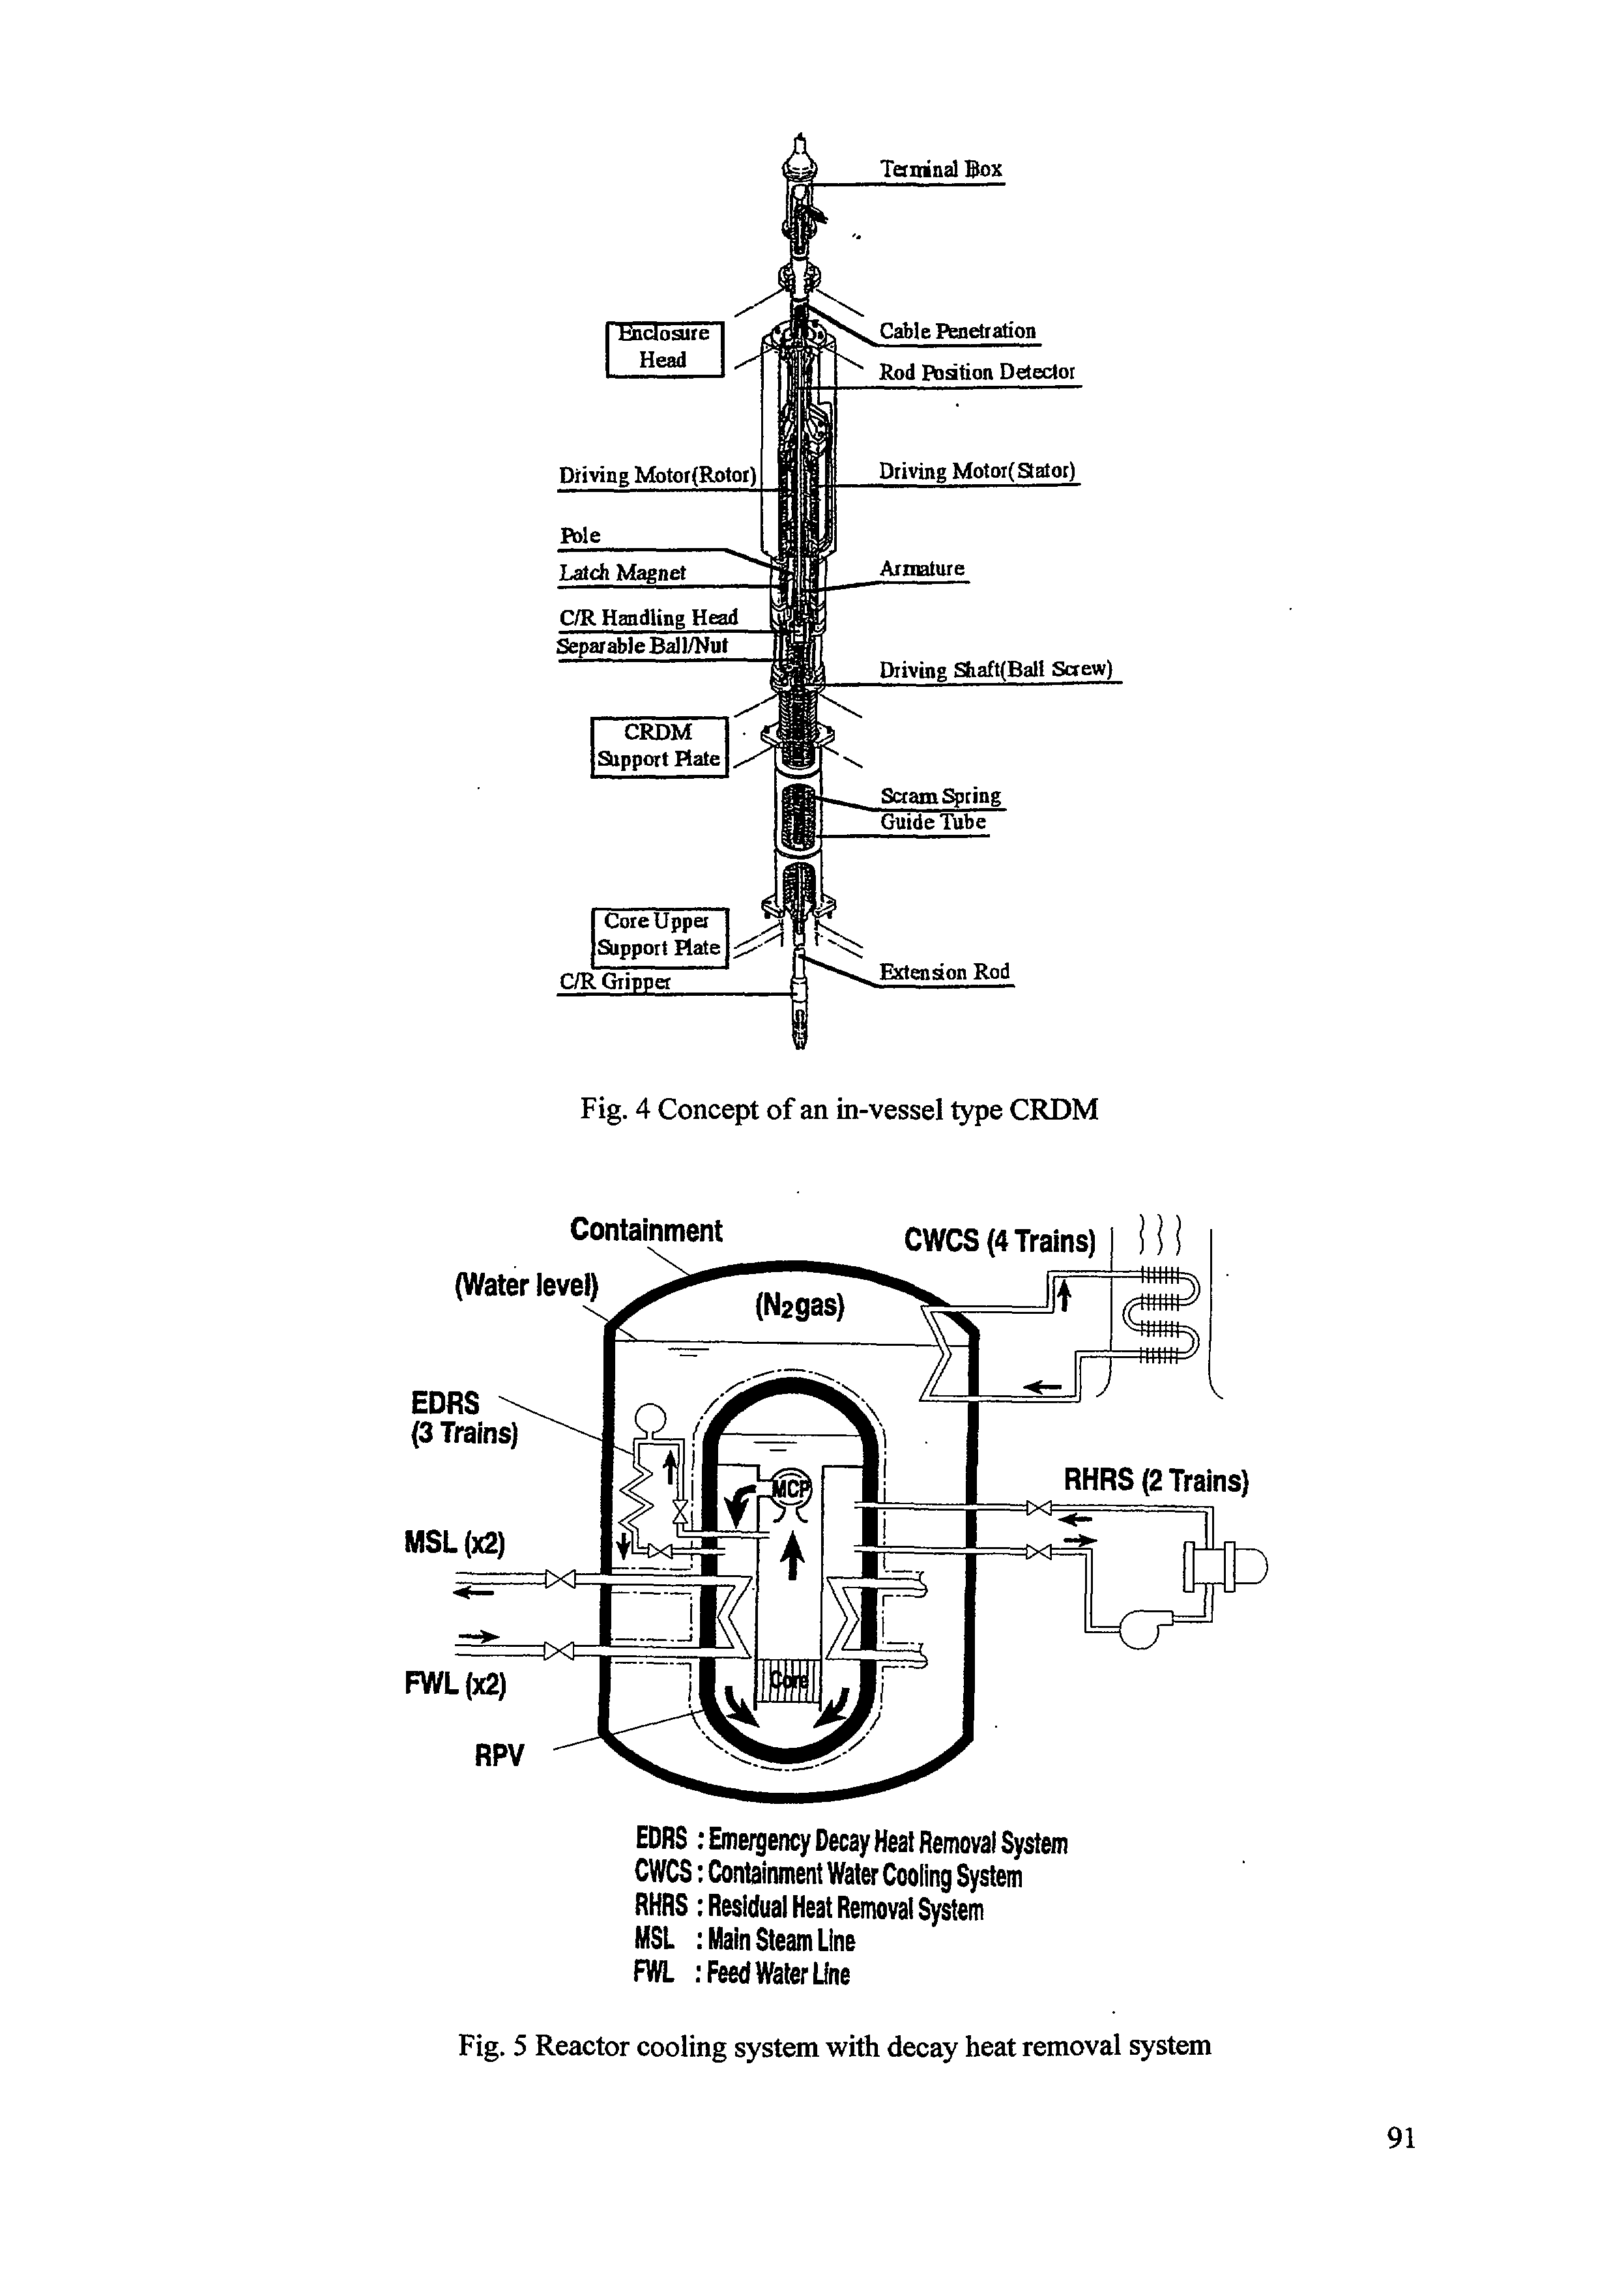 Fig. 5 Reactor cooling system with decay heat removal system...